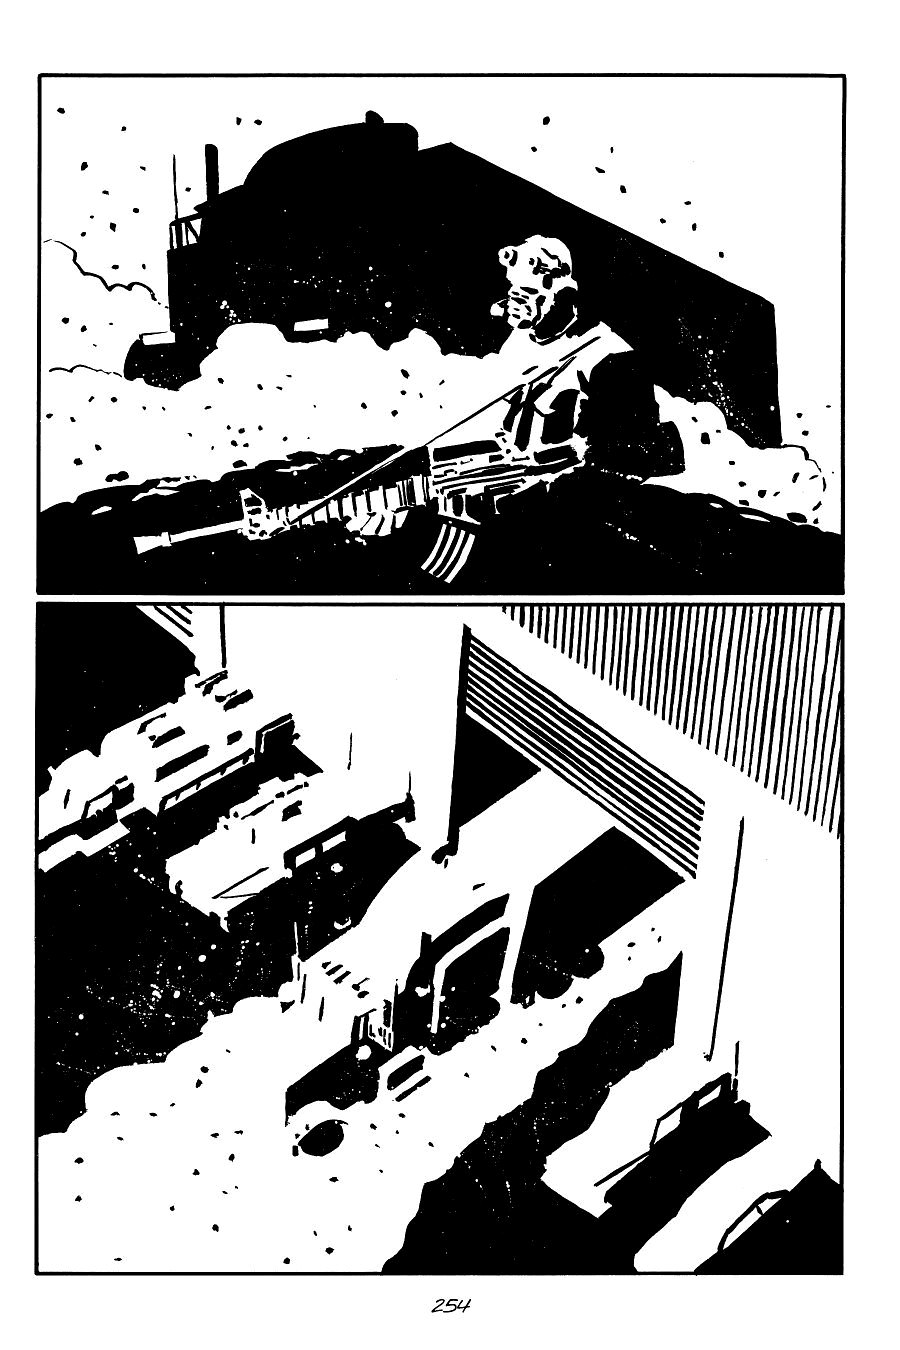 page 254 of sin city 7 hell and back